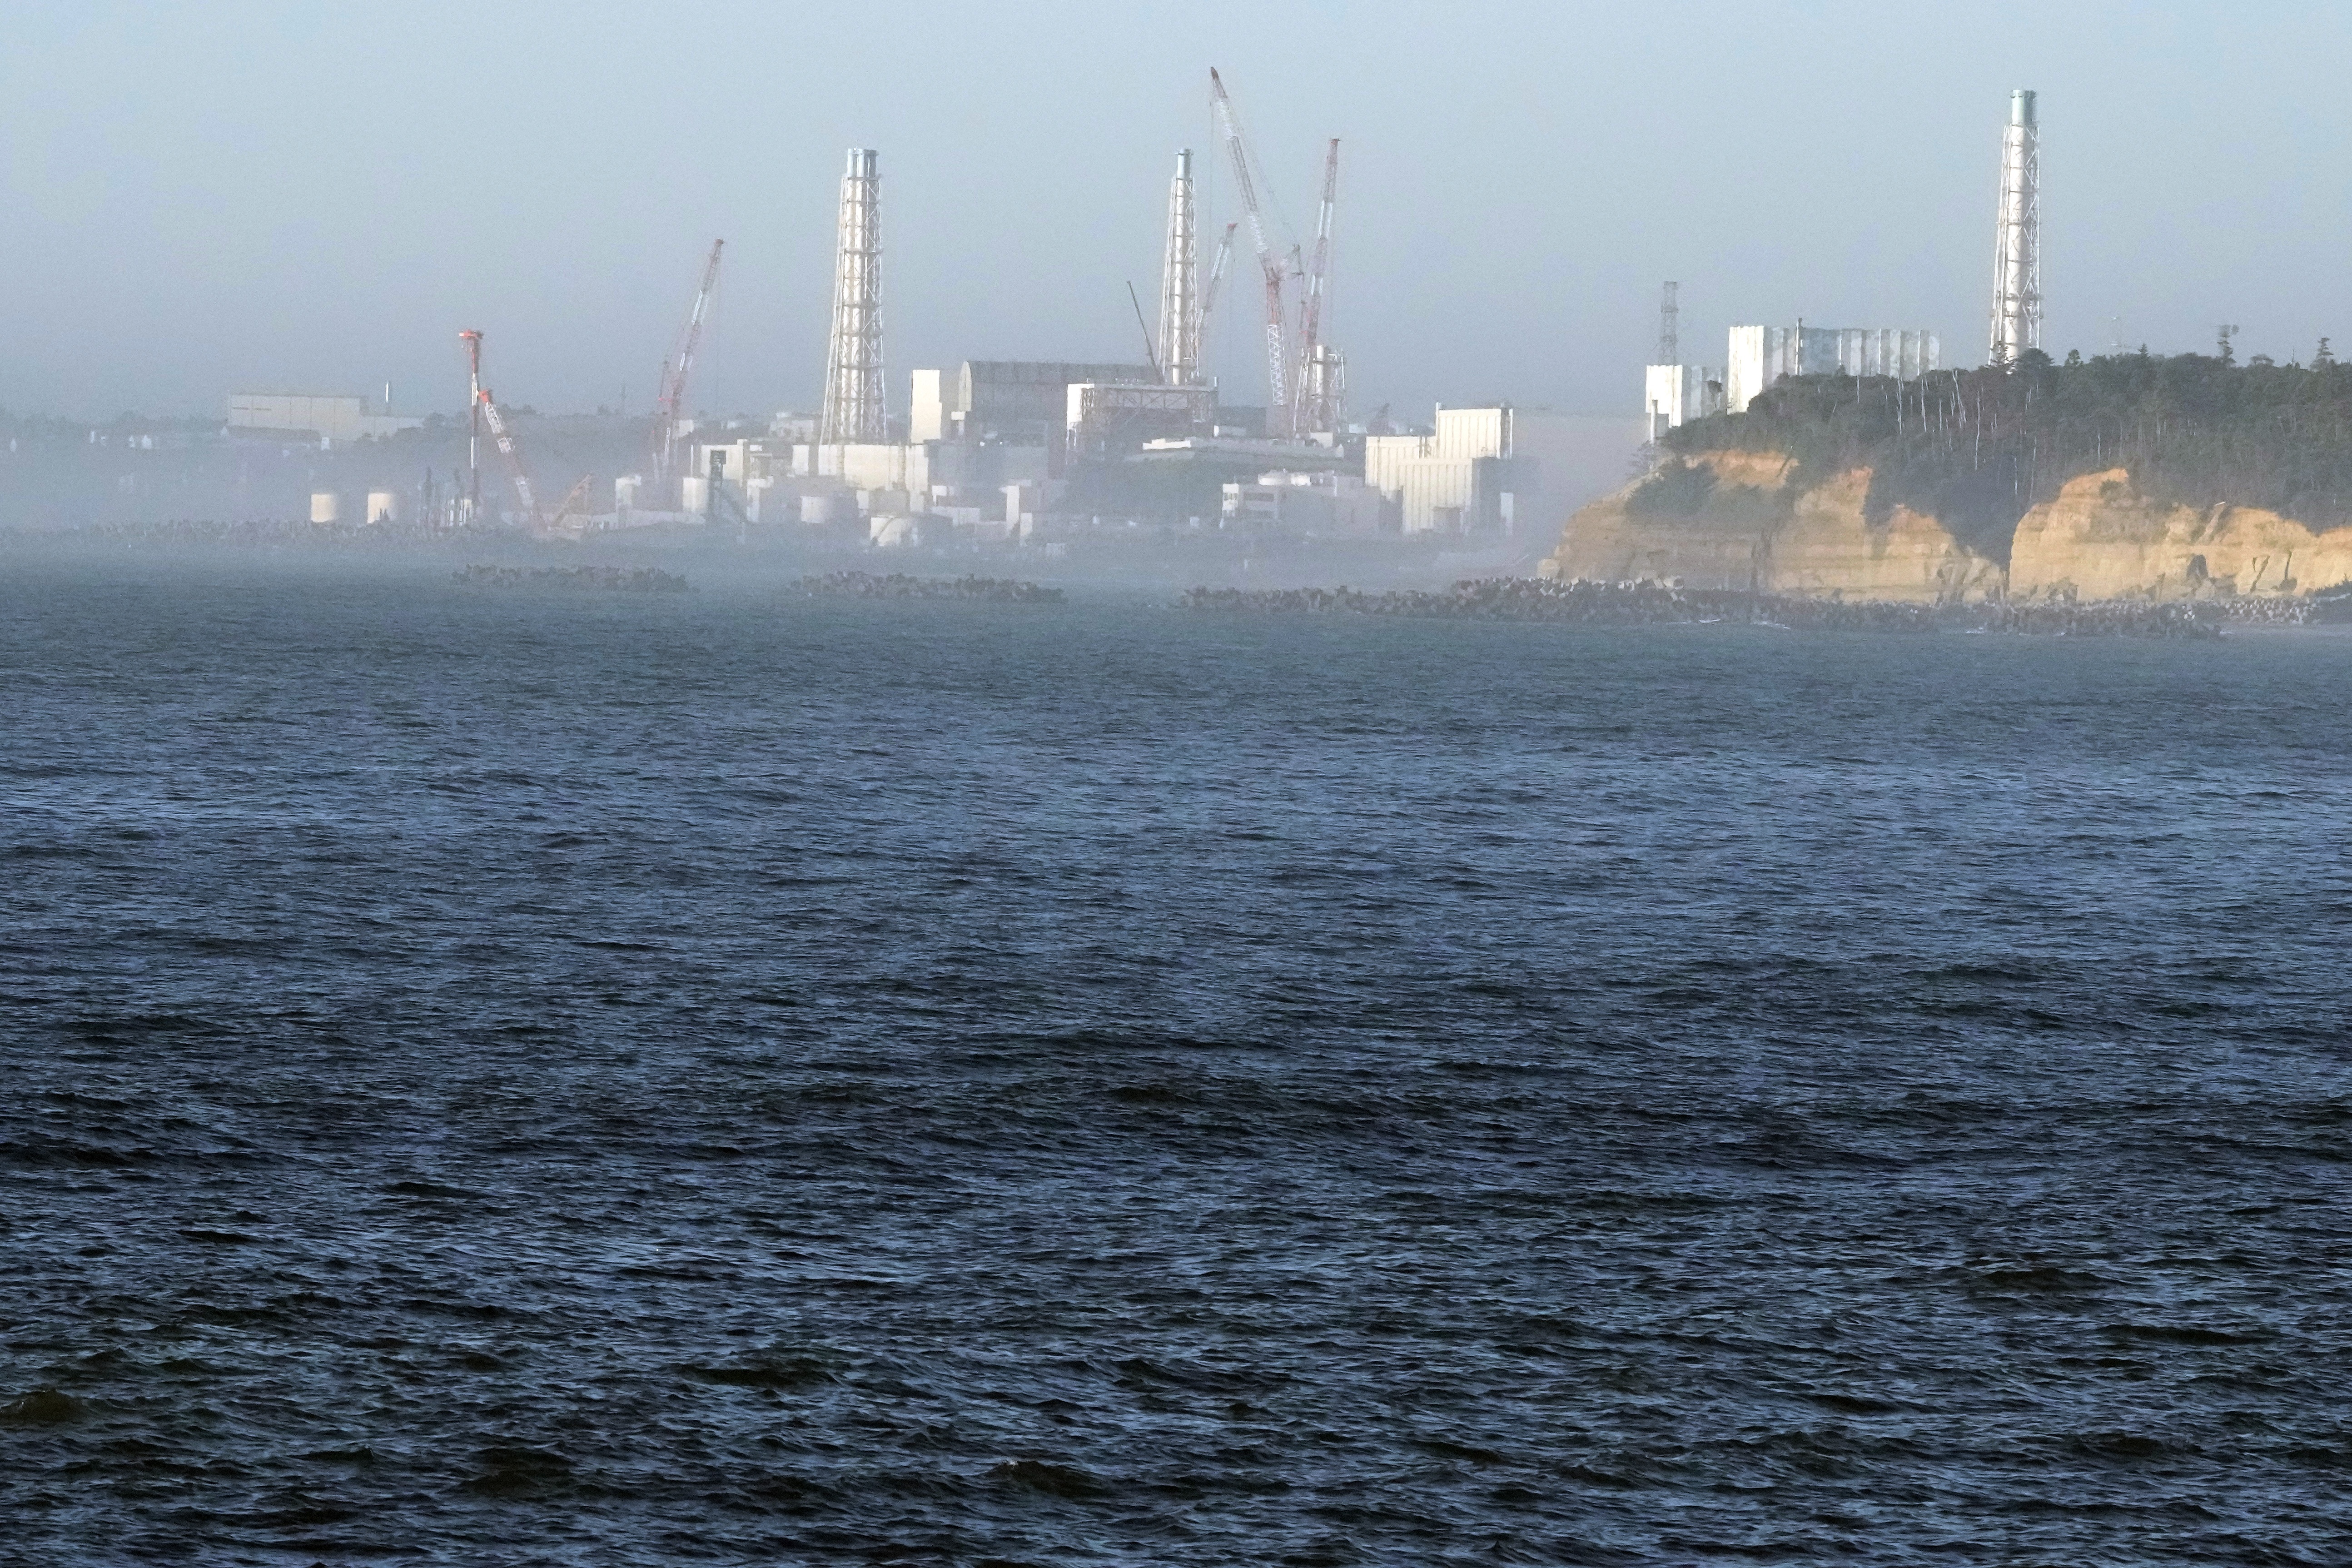 The operator of the tsunami-wrecked Fukushima Daiichi nuclear power plant will begin releasing the first batch of treated and diluted radioactive wastewater into the Pacific Ocean later Thursday, Aug. 24, 2023, utility executives said.